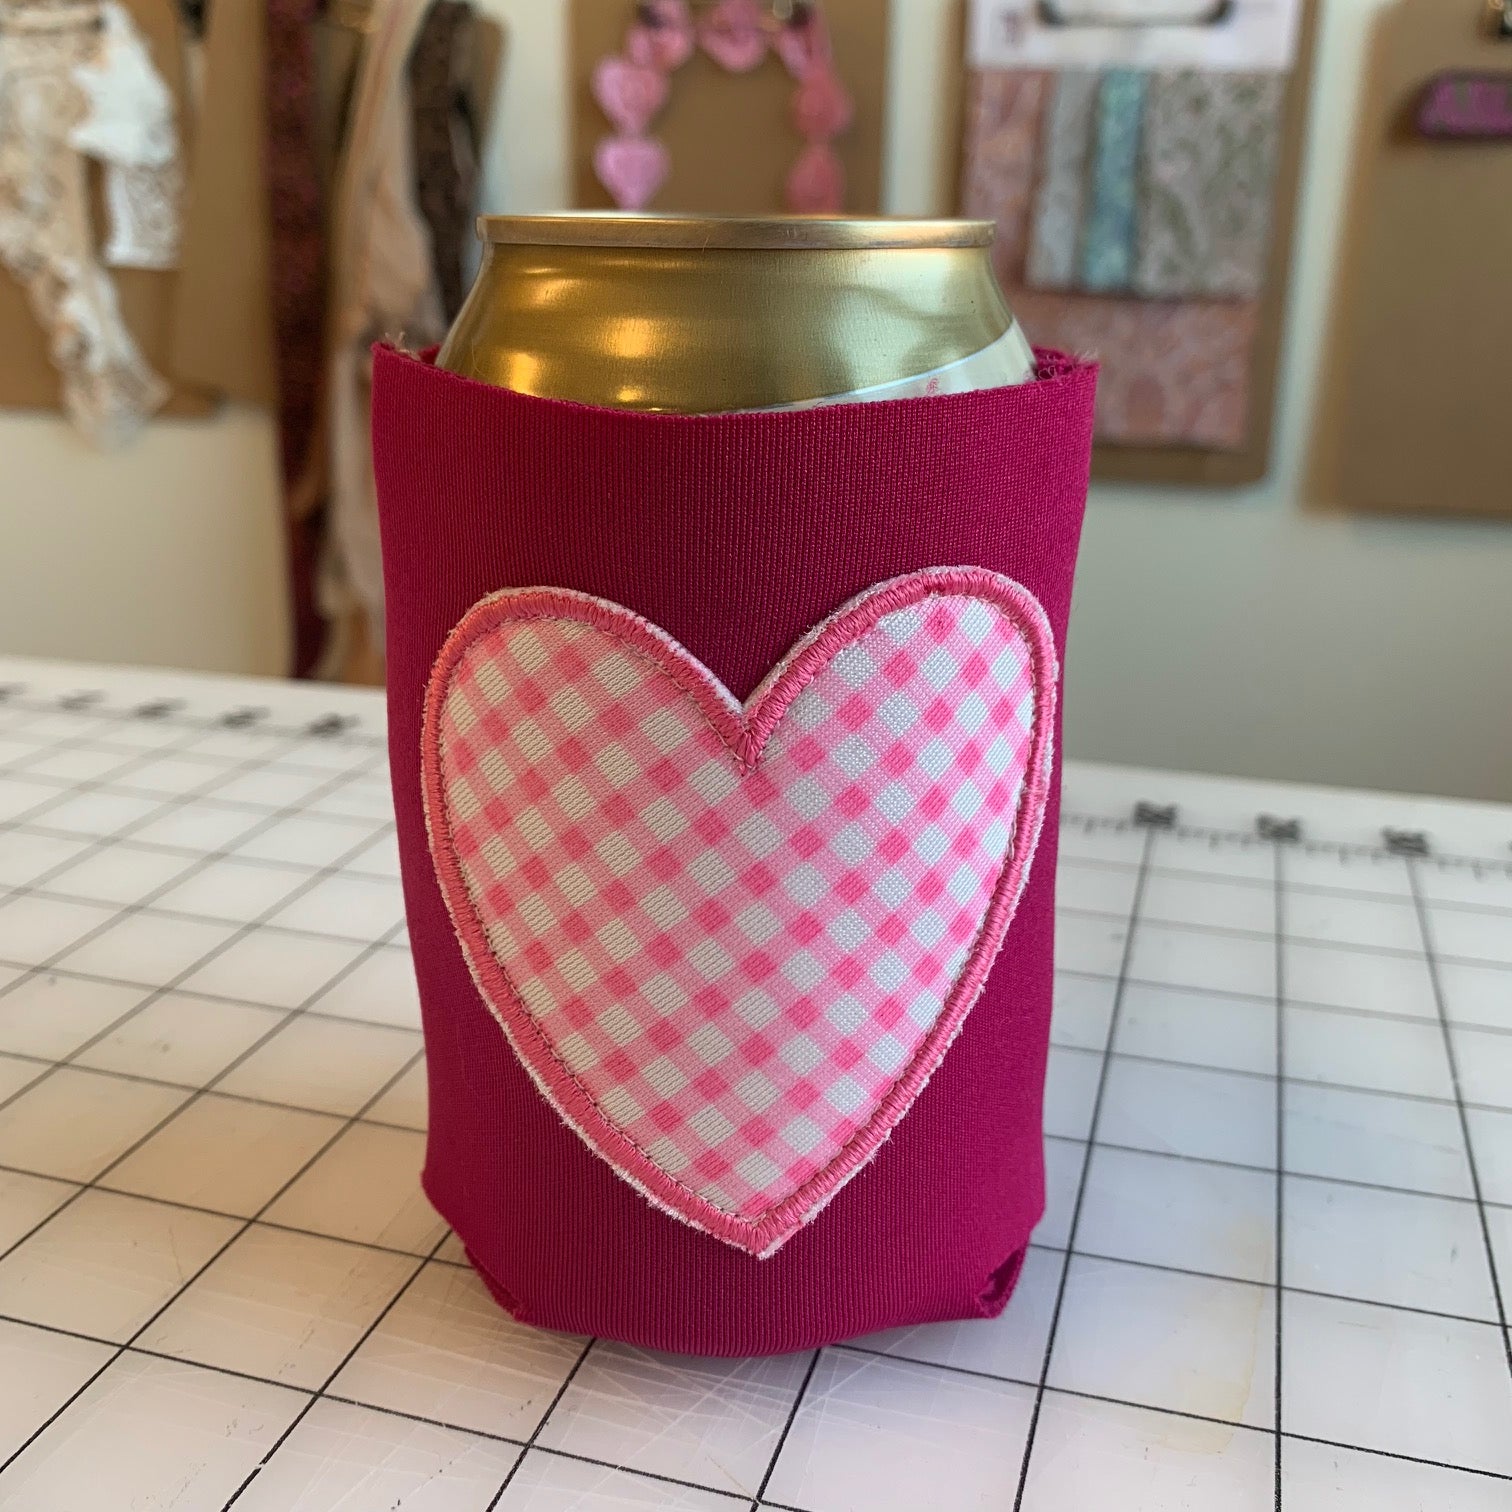 Custom Beer Koozies and Personalized Beery Cozy: Happy St. Patrick's Day